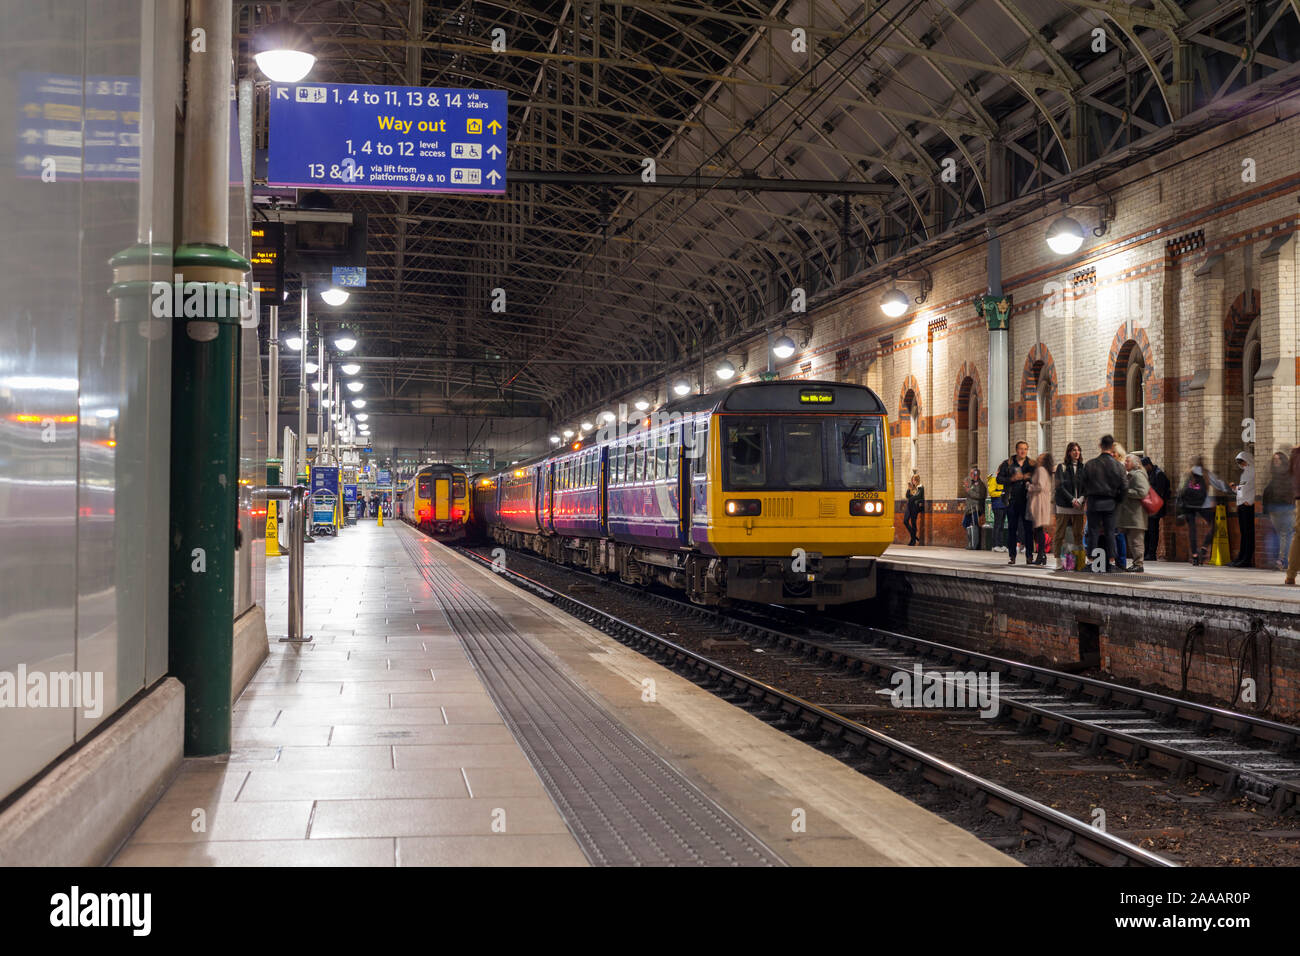 Arriva Northern rail class 142 pacer train at Manchester Piccadilly with a class 156 sprinter to the left. Stock Photo